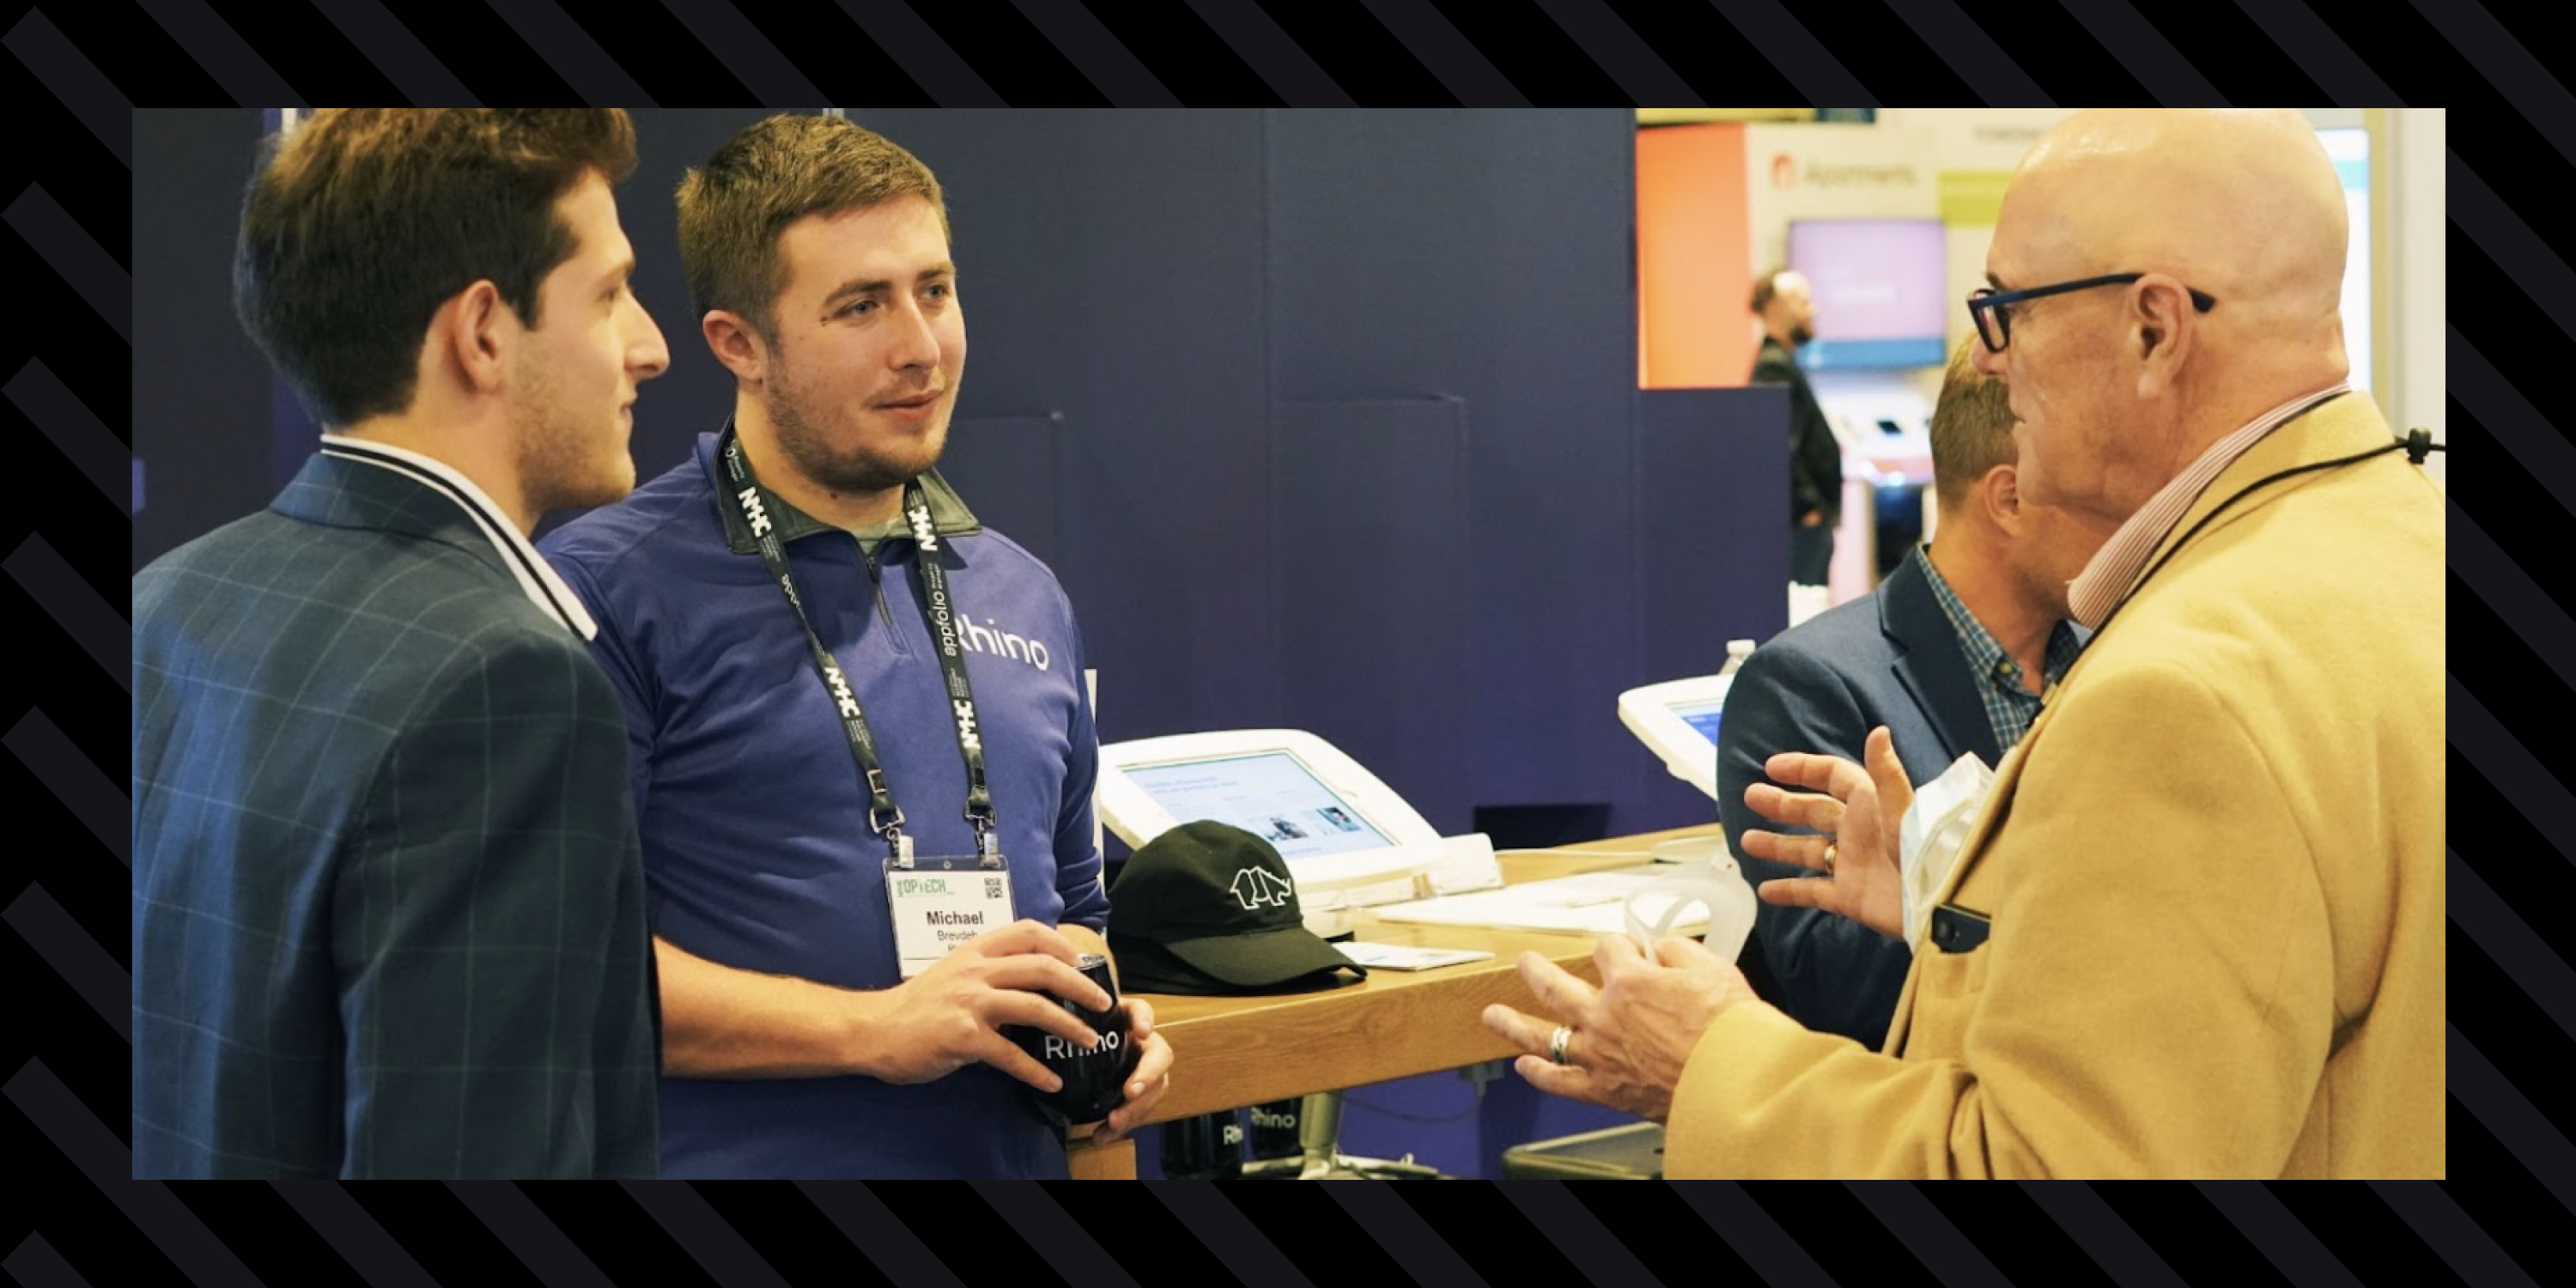 An image of Rhino employees David Berardi and Michael Brevdah talking with a visitor to the Rhino booth at Optech 2021 